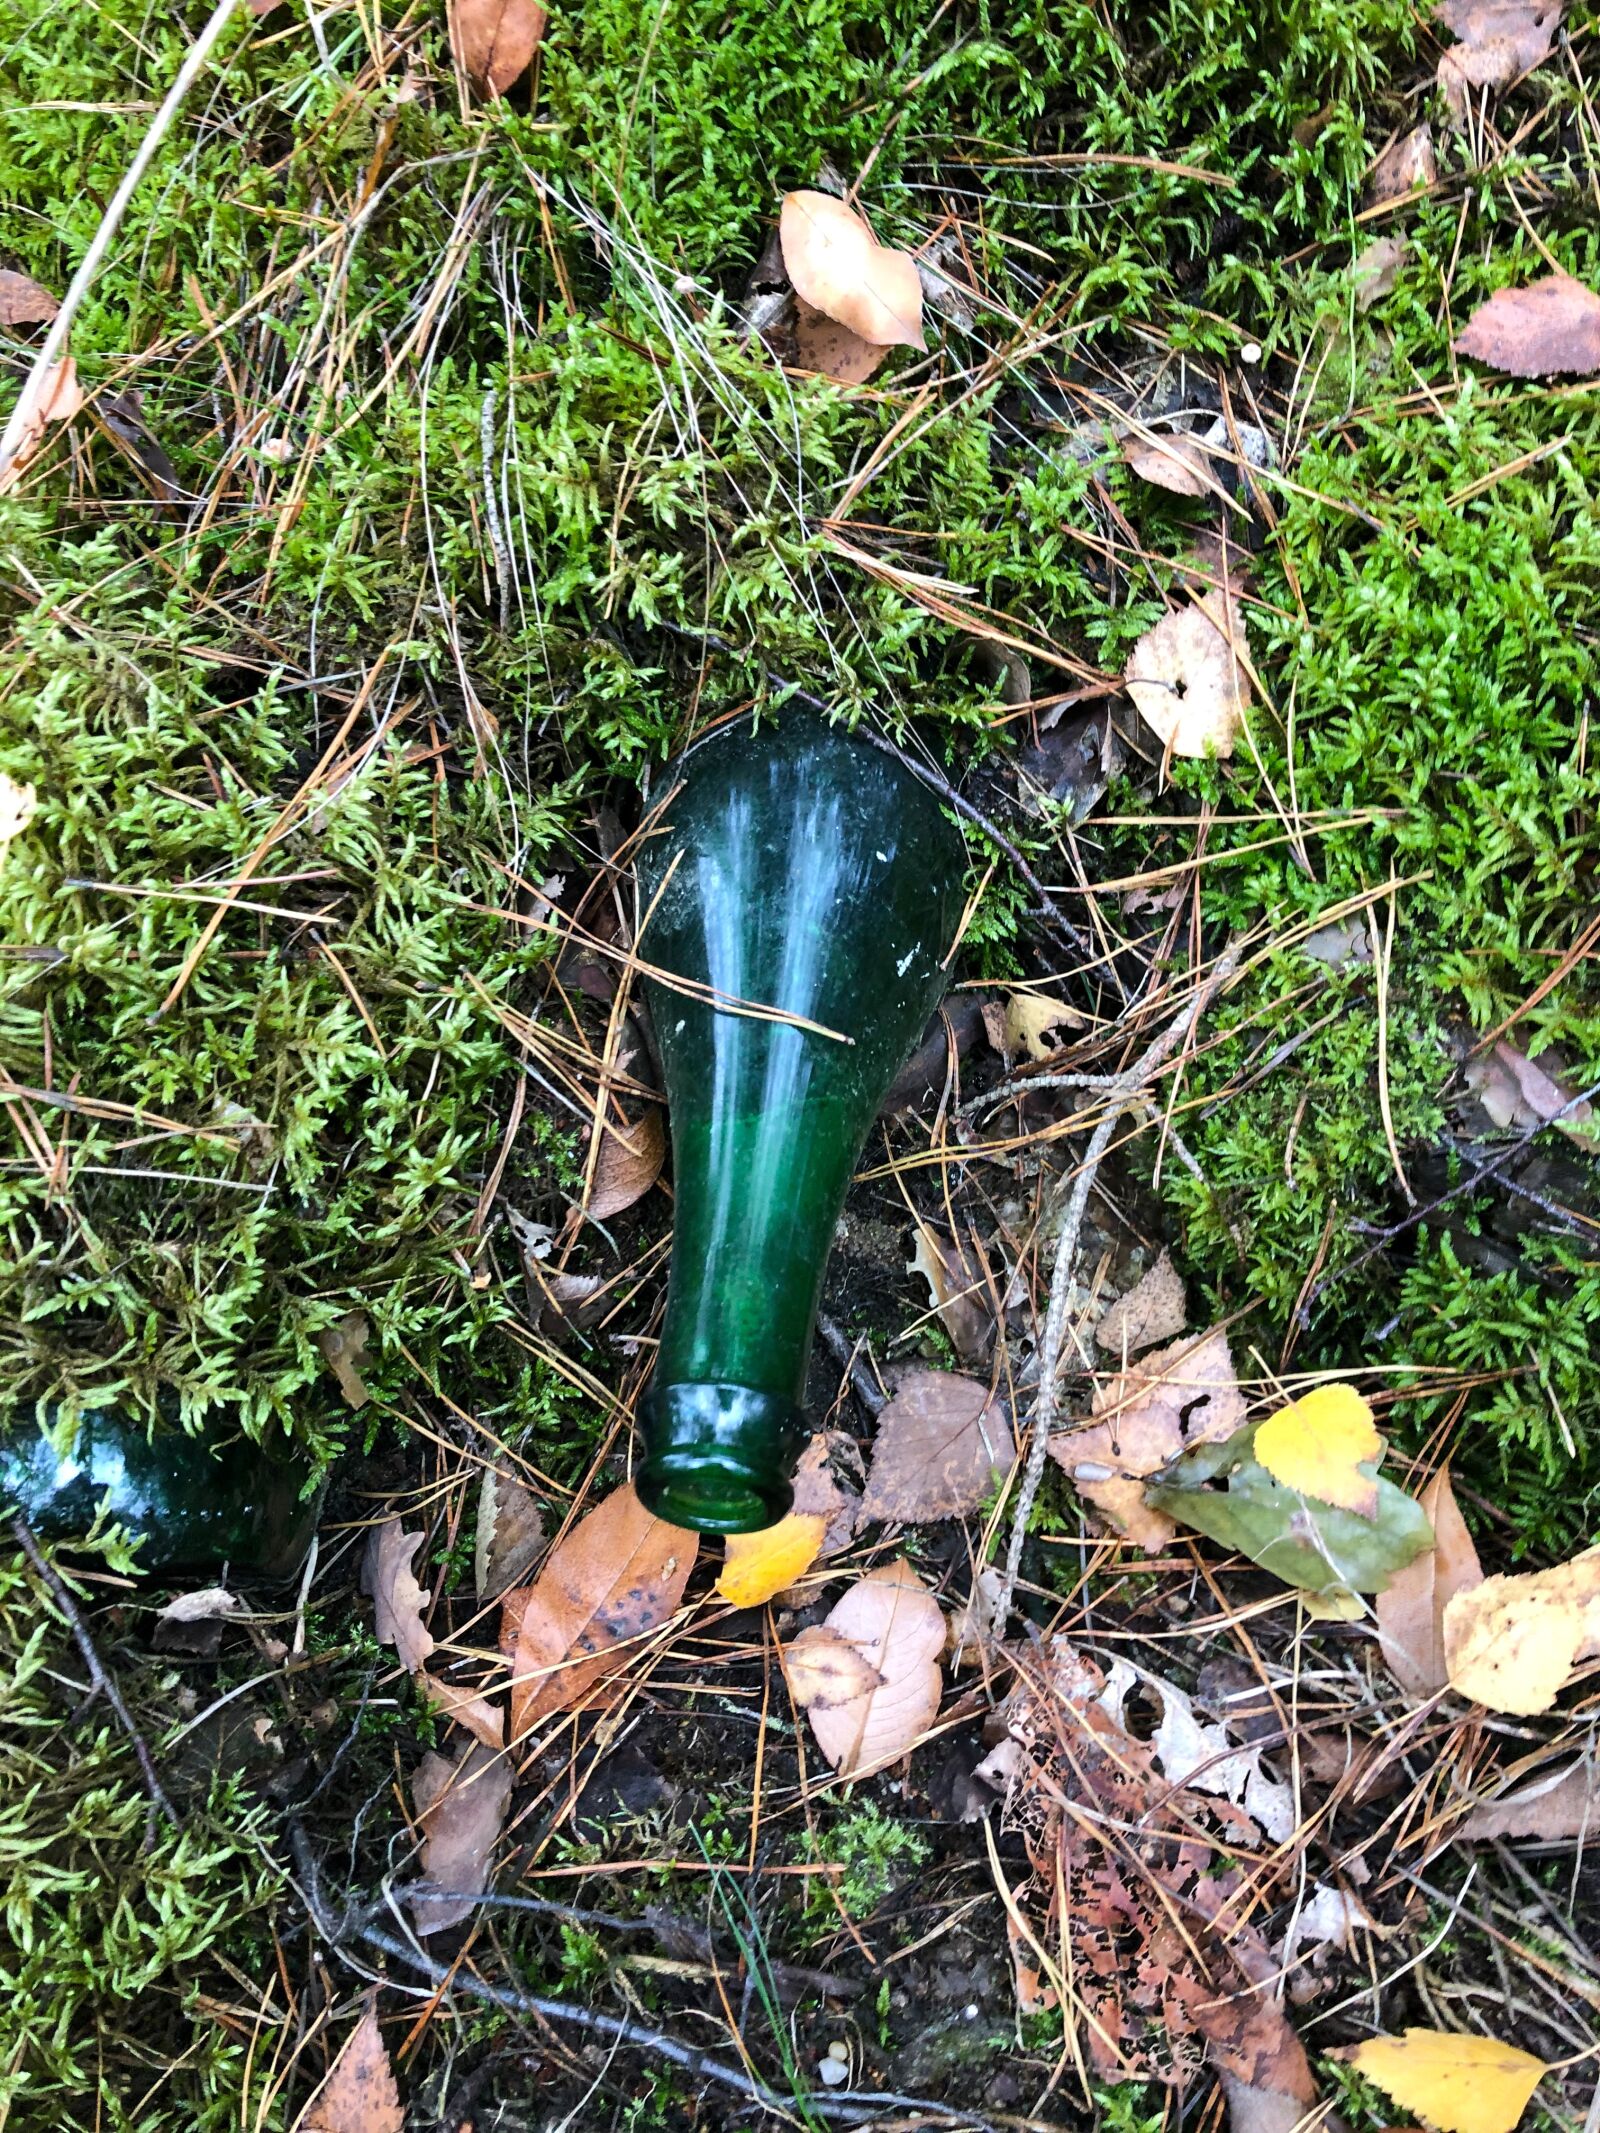 iPhone 8 back camera 3.99mm f/1.8 sample photo. Forest, garbage, bottle photography